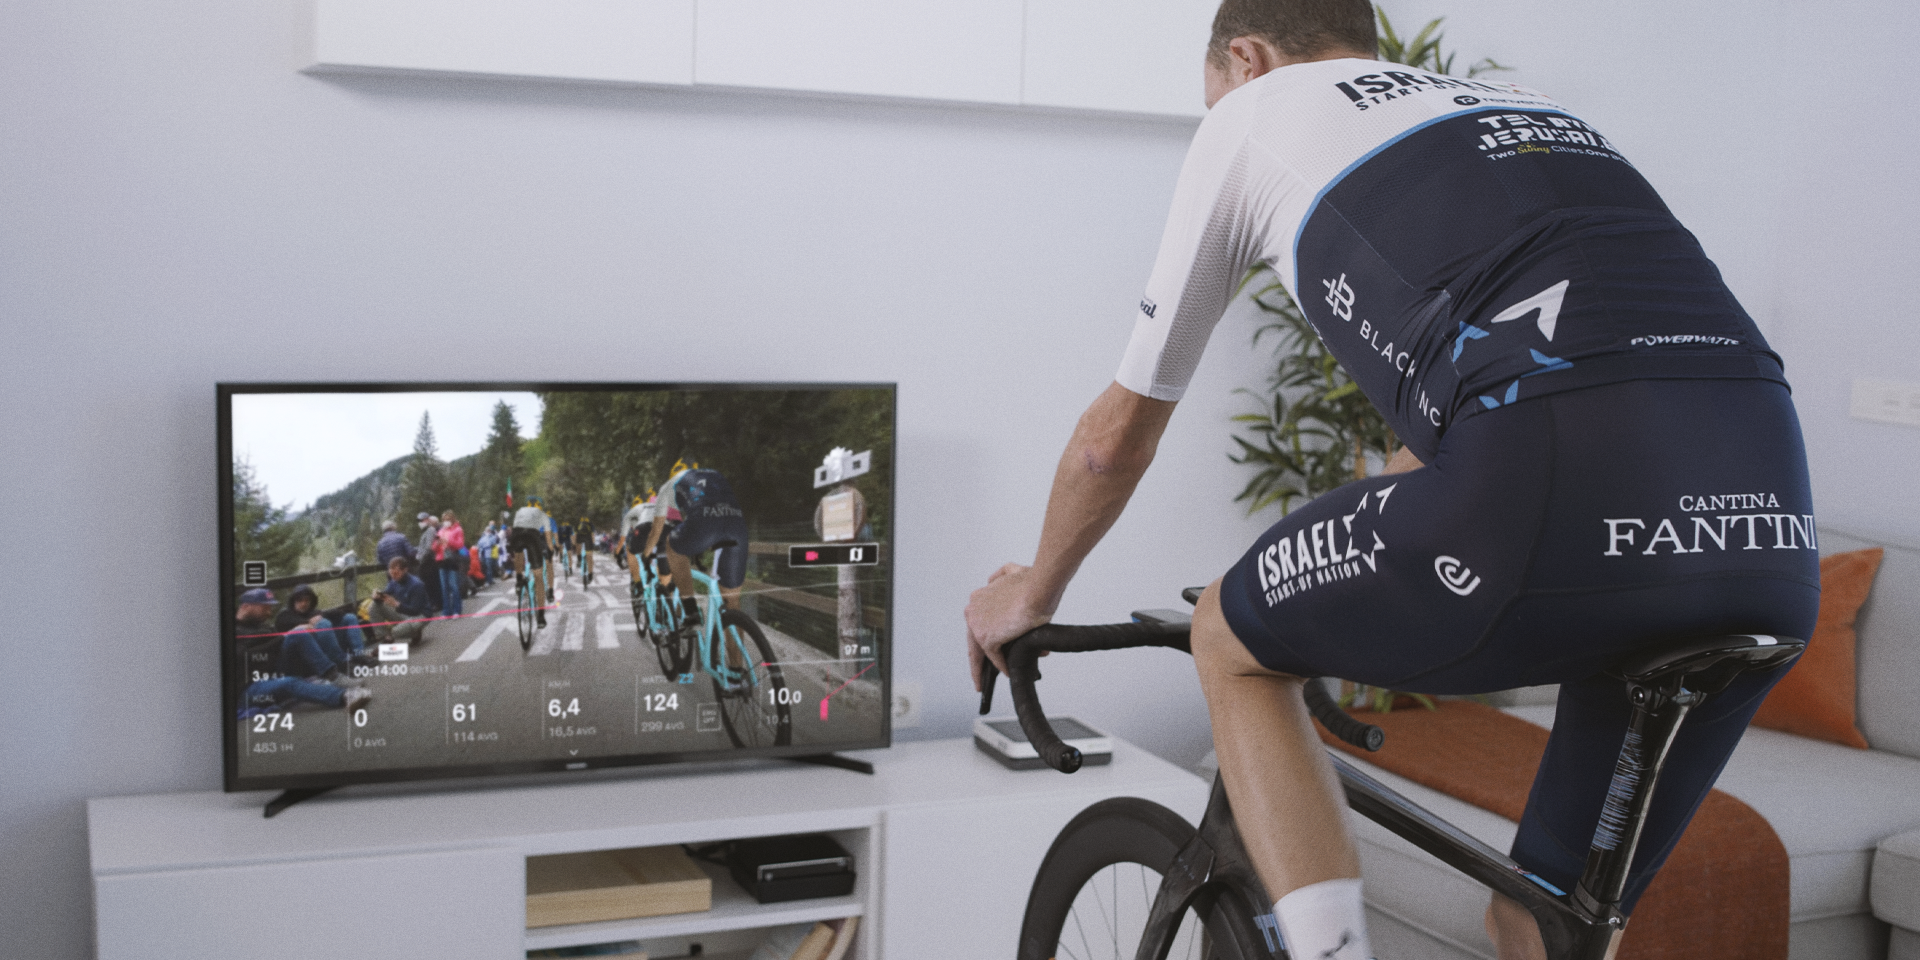 The Giro dItalia Virtual hosted by BKOOL is back for its 2nd edition Giro dItalia 2023